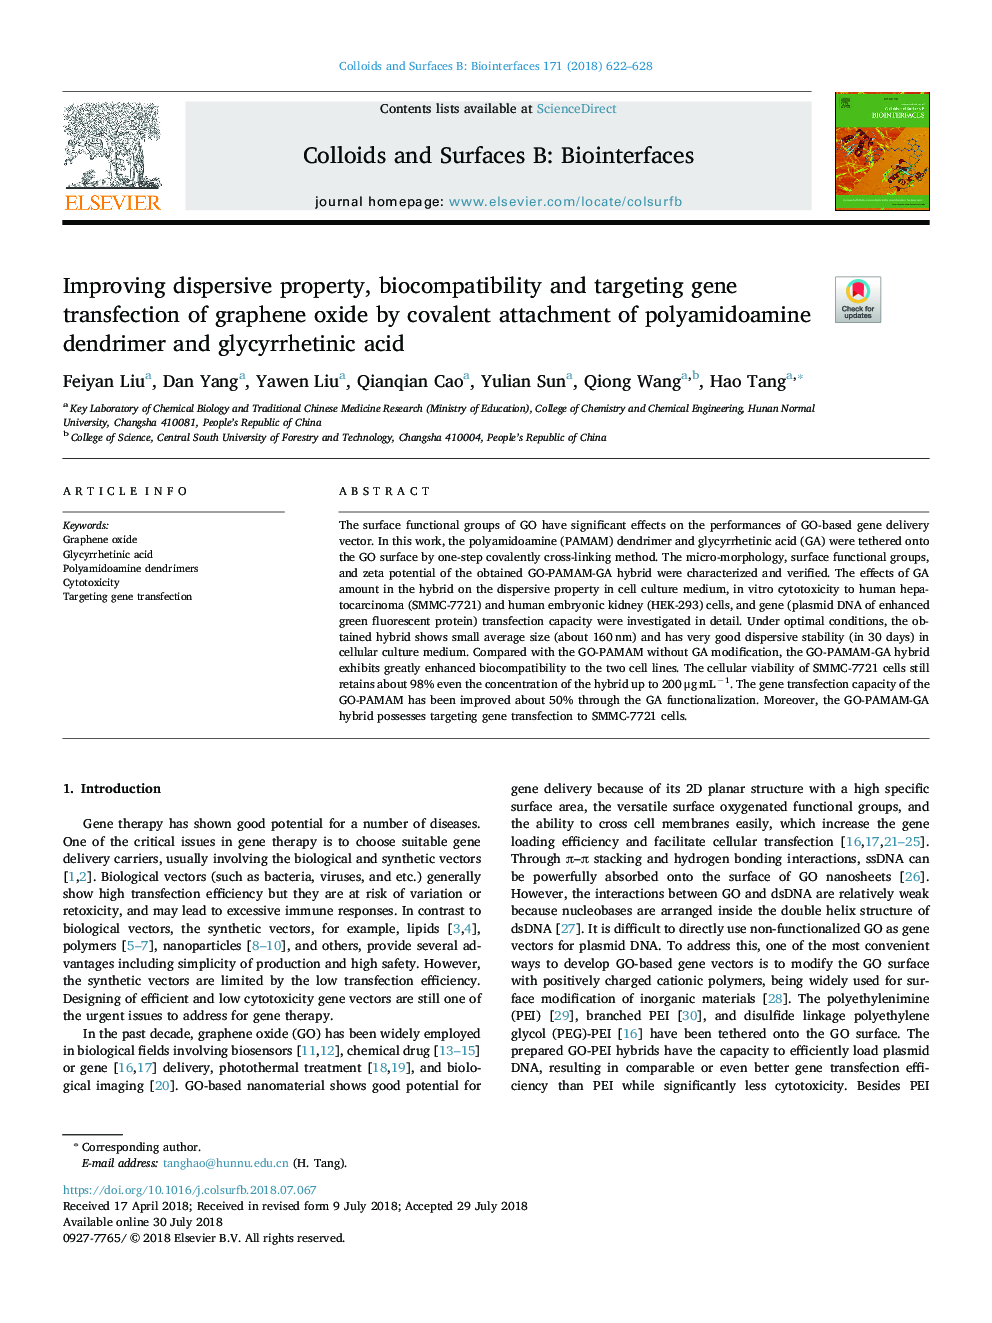 Improving dispersive property, biocompatibility and targeting gene transfection of graphene oxide by covalent attachment of polyamidoamine dendrimer and glycyrrhetinic acid